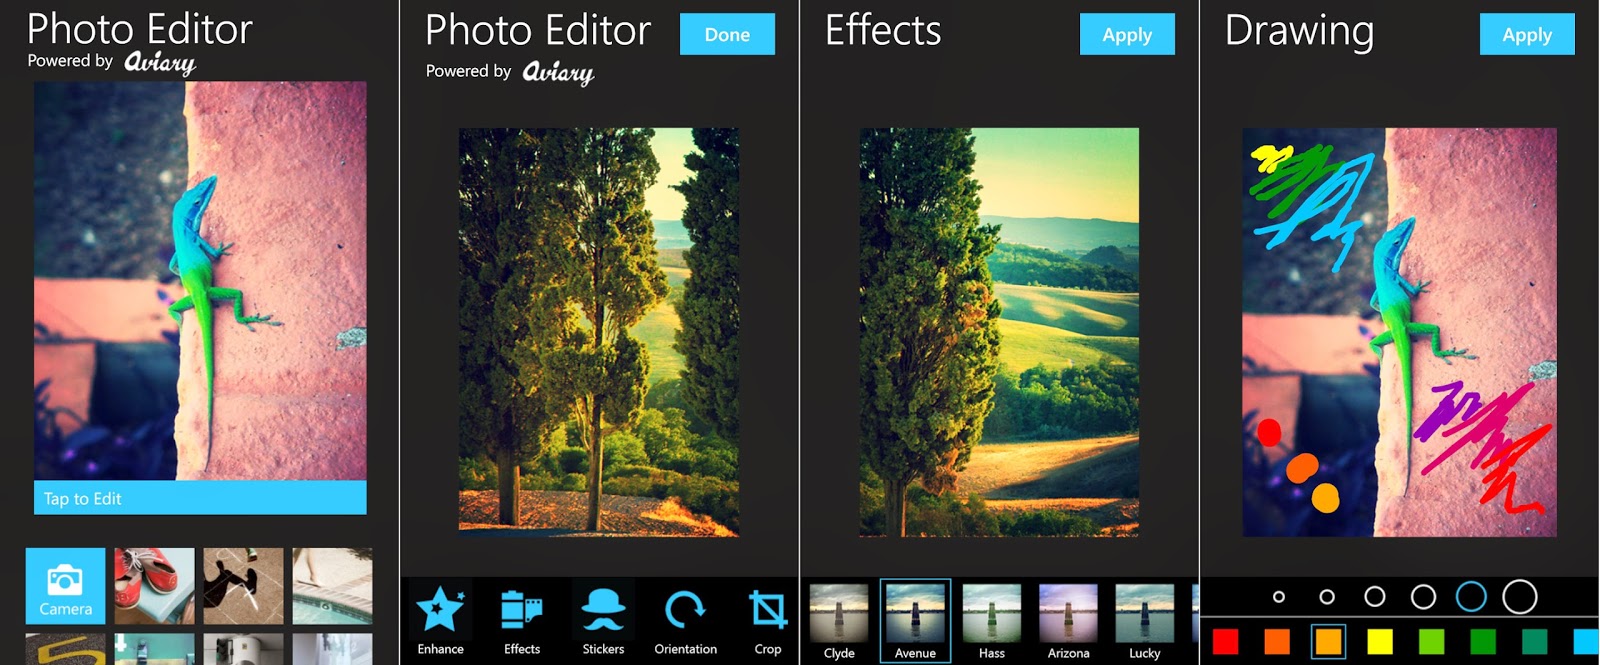 10 BEST PHOTO EDITOR APPS FOR ANDROID AND I-PHONE | Morning Tea